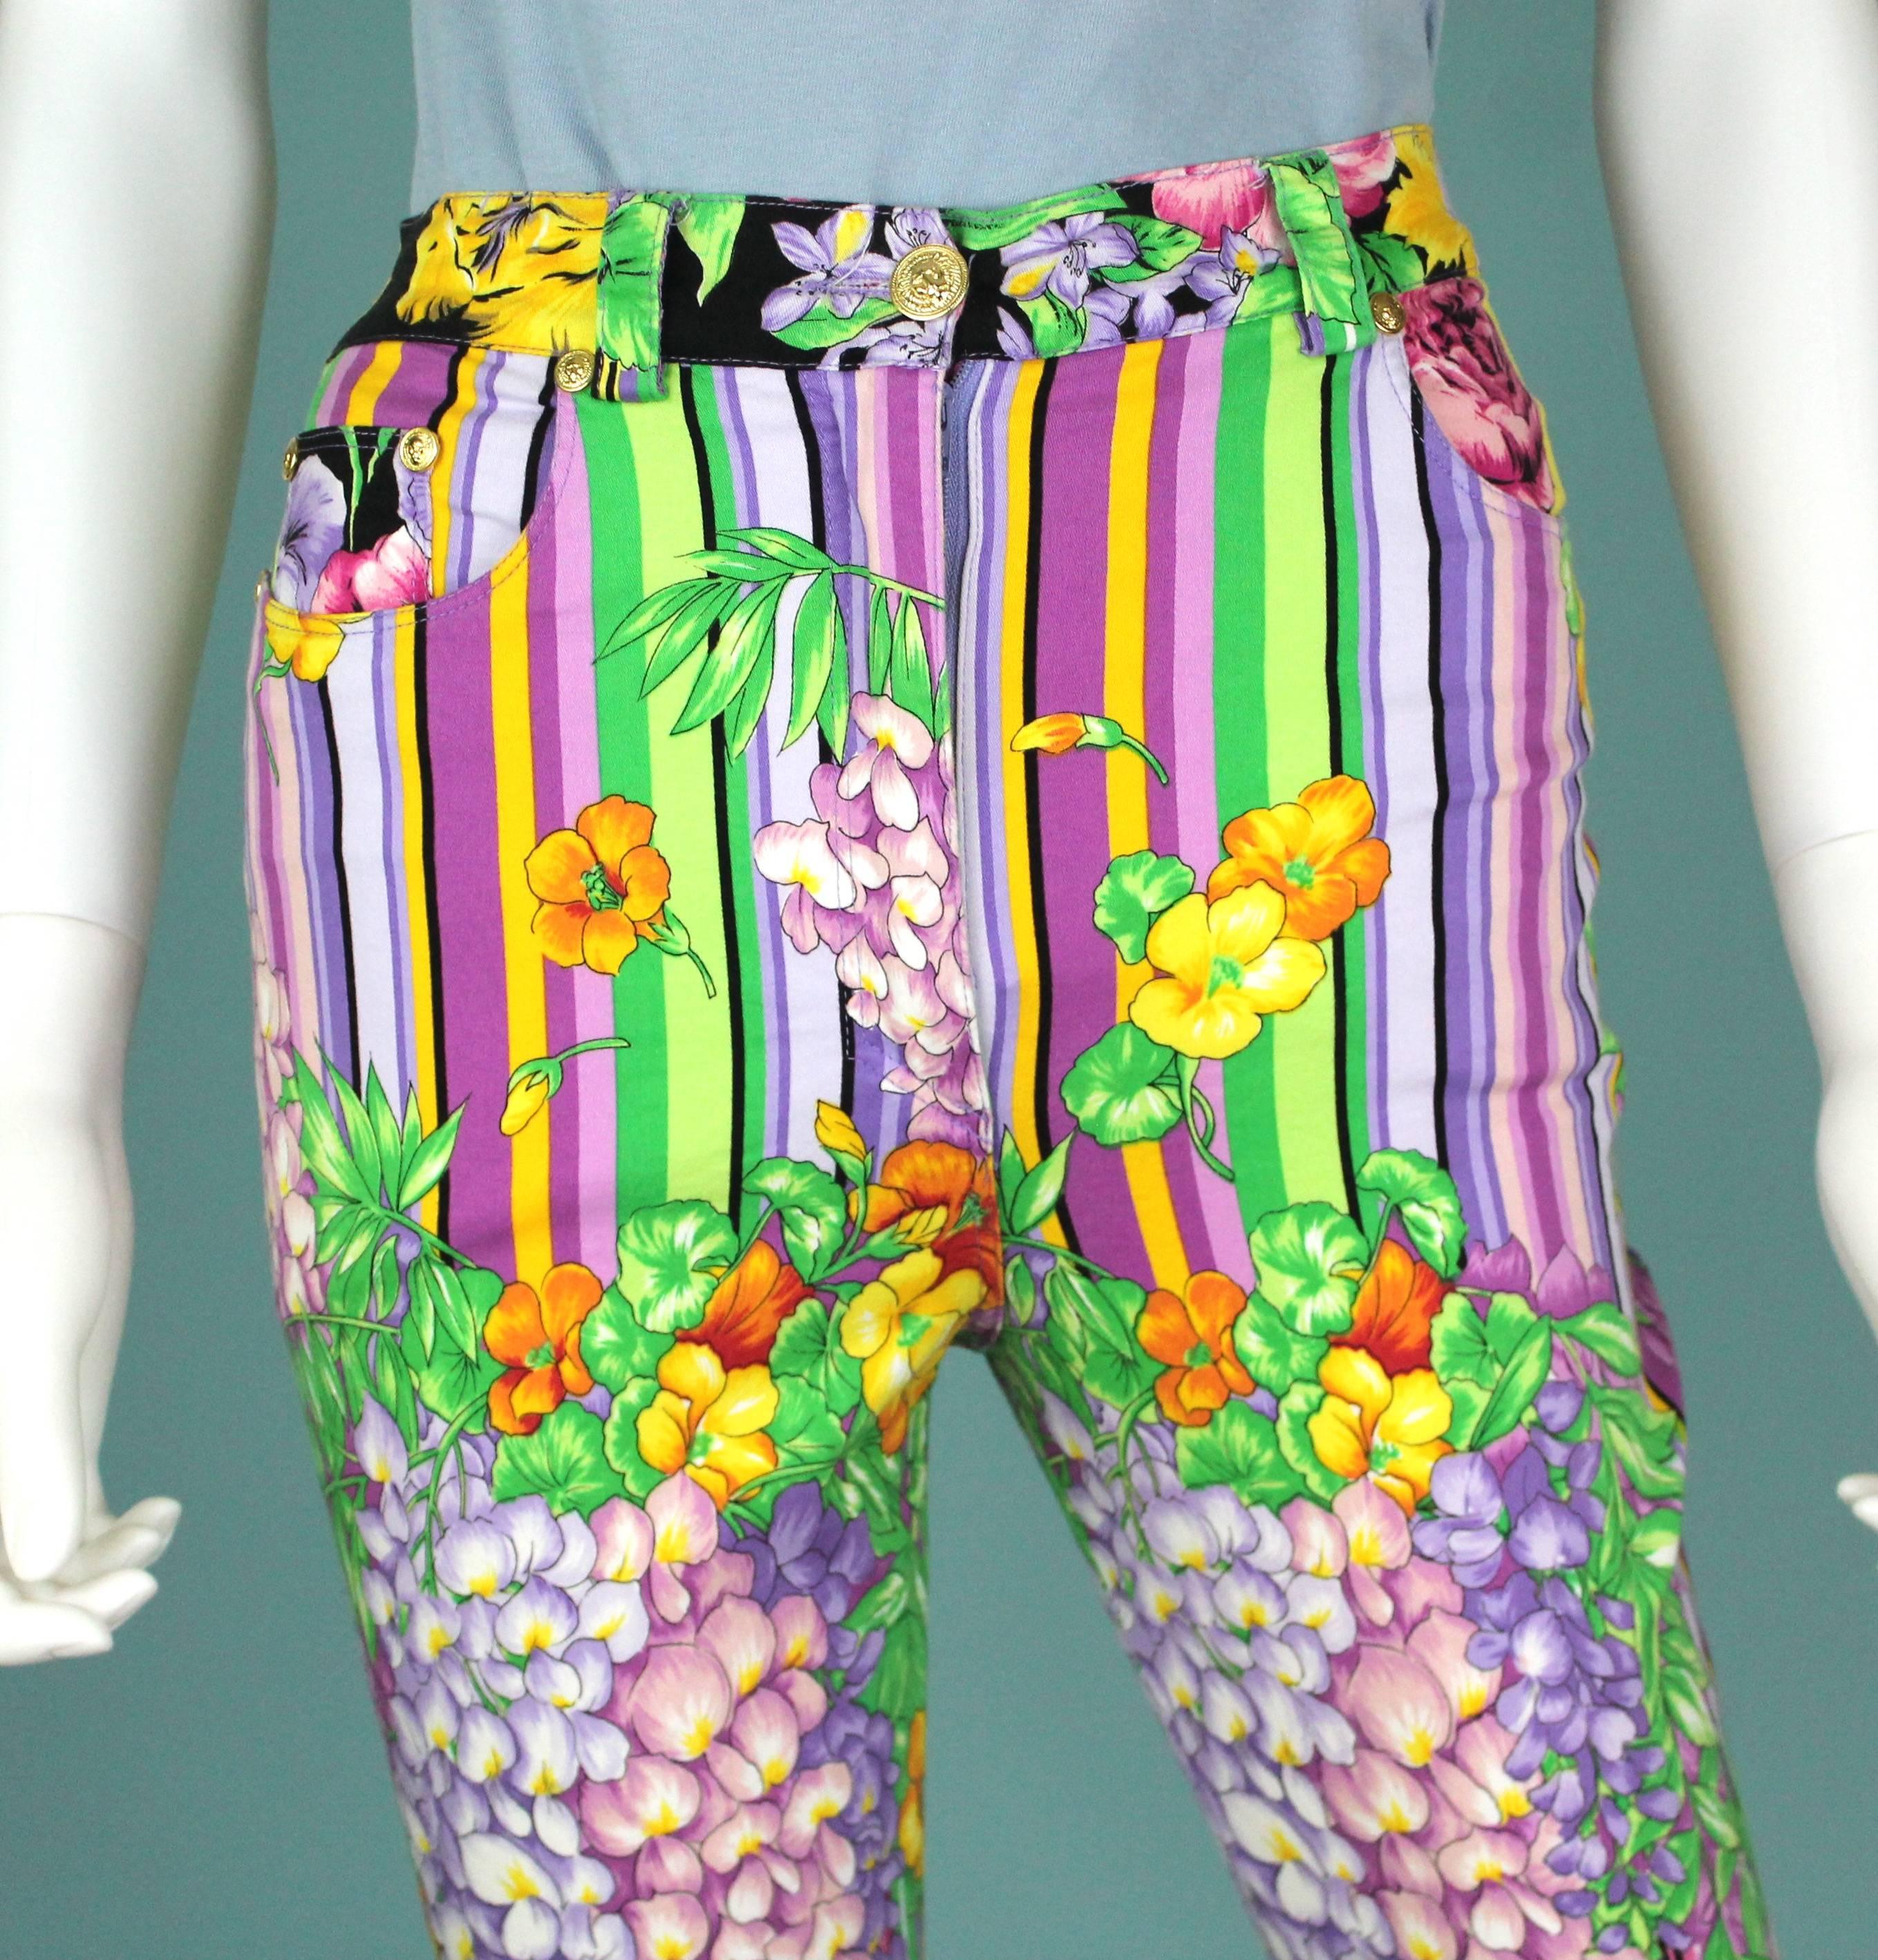 -Absolutely gorgeous jeans from Versus by Gianni Versace
-In bright floral pattern that features roses, tulips, and wisterias. 
-Zip up at the ankle, 5 pocket design, lion head hardware intact throughout 
-Sized US 28 W , Italian 42 (US 6) - but fit